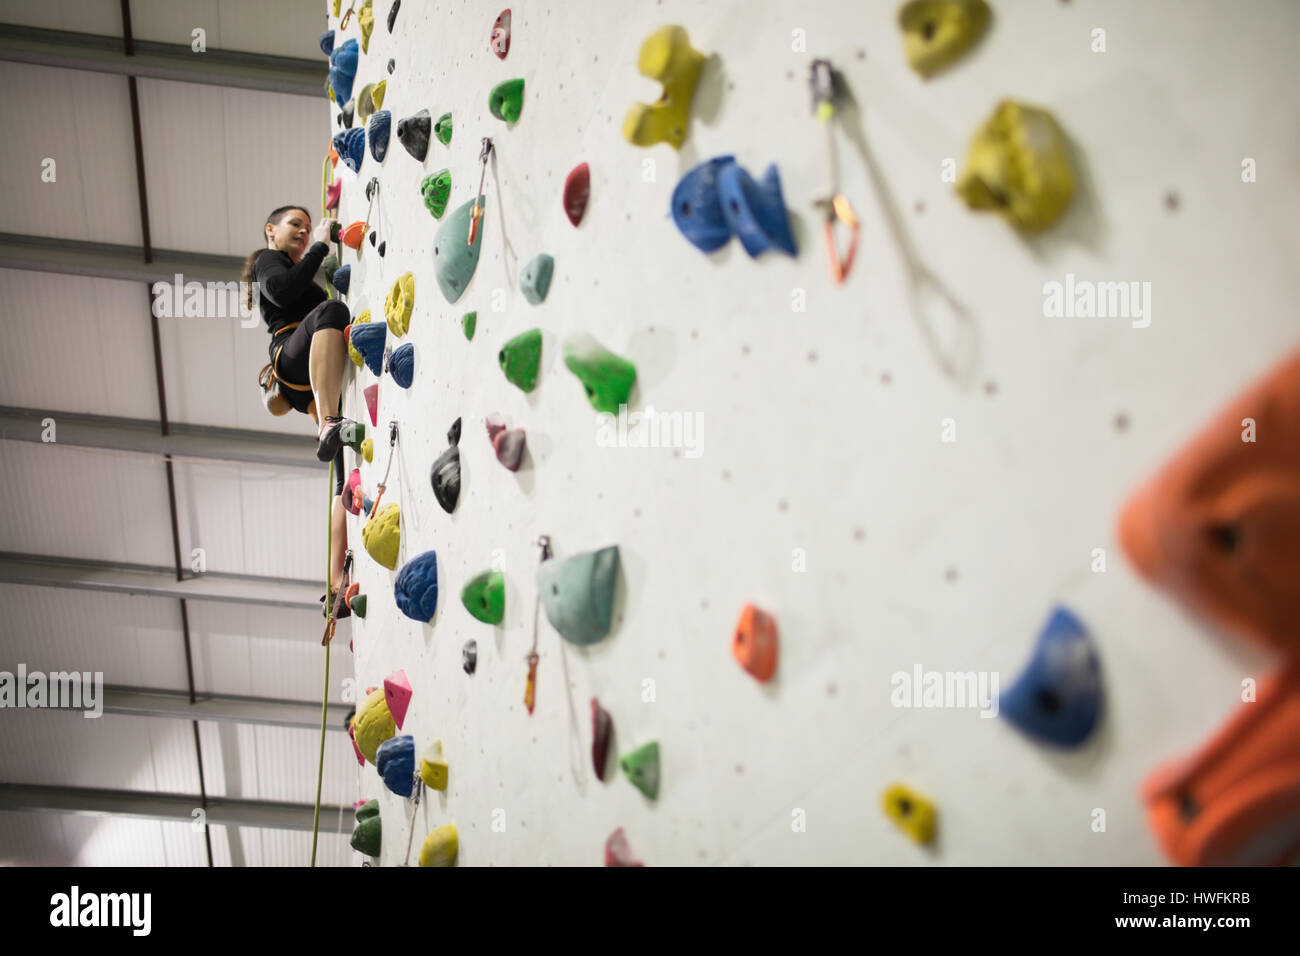 Woman practicing rock climbing on artificial climbing wall in gym Stock Photo